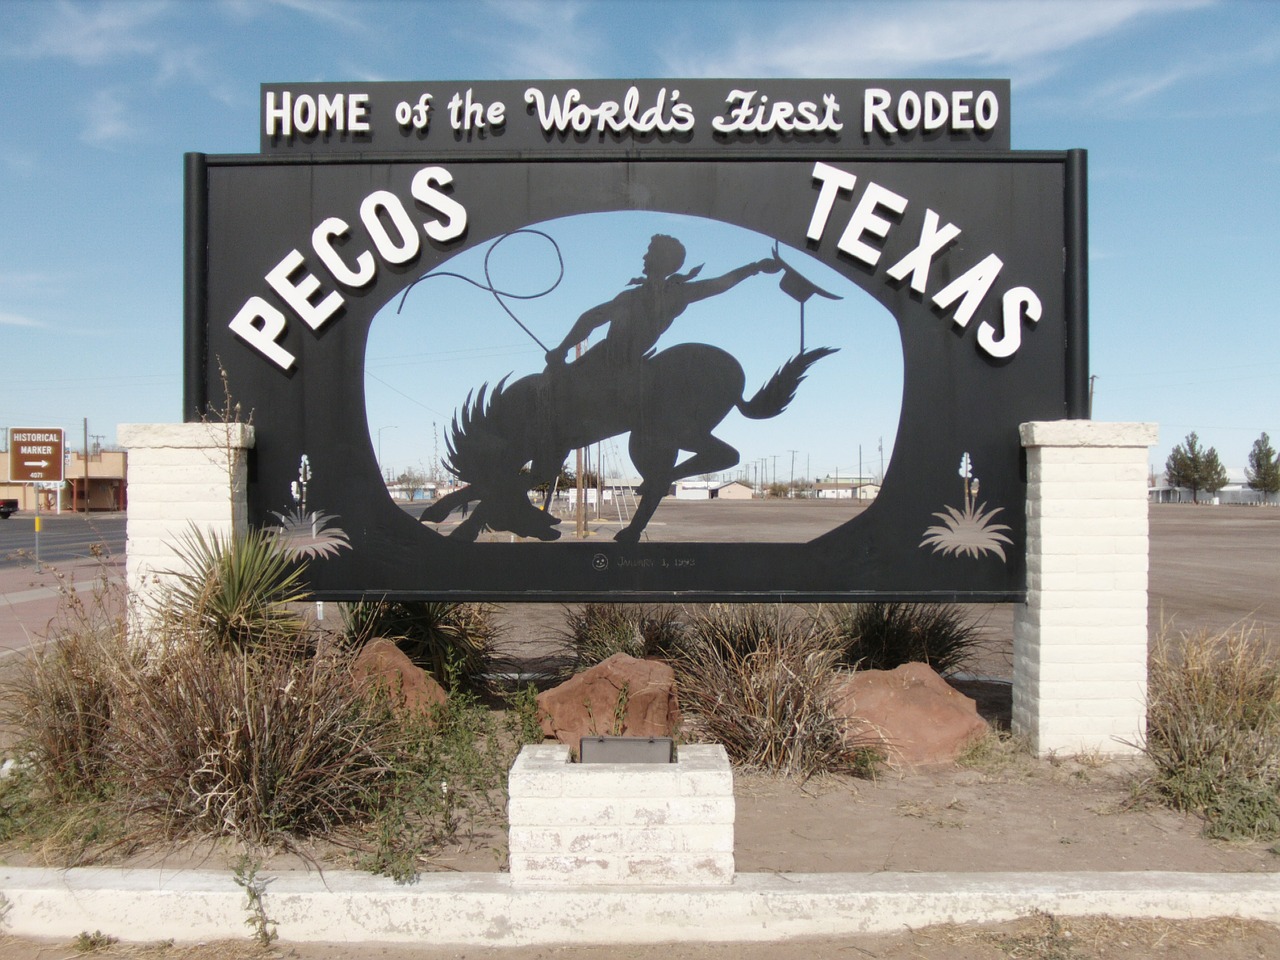 pecos texas world first rodeo metal sign free photo